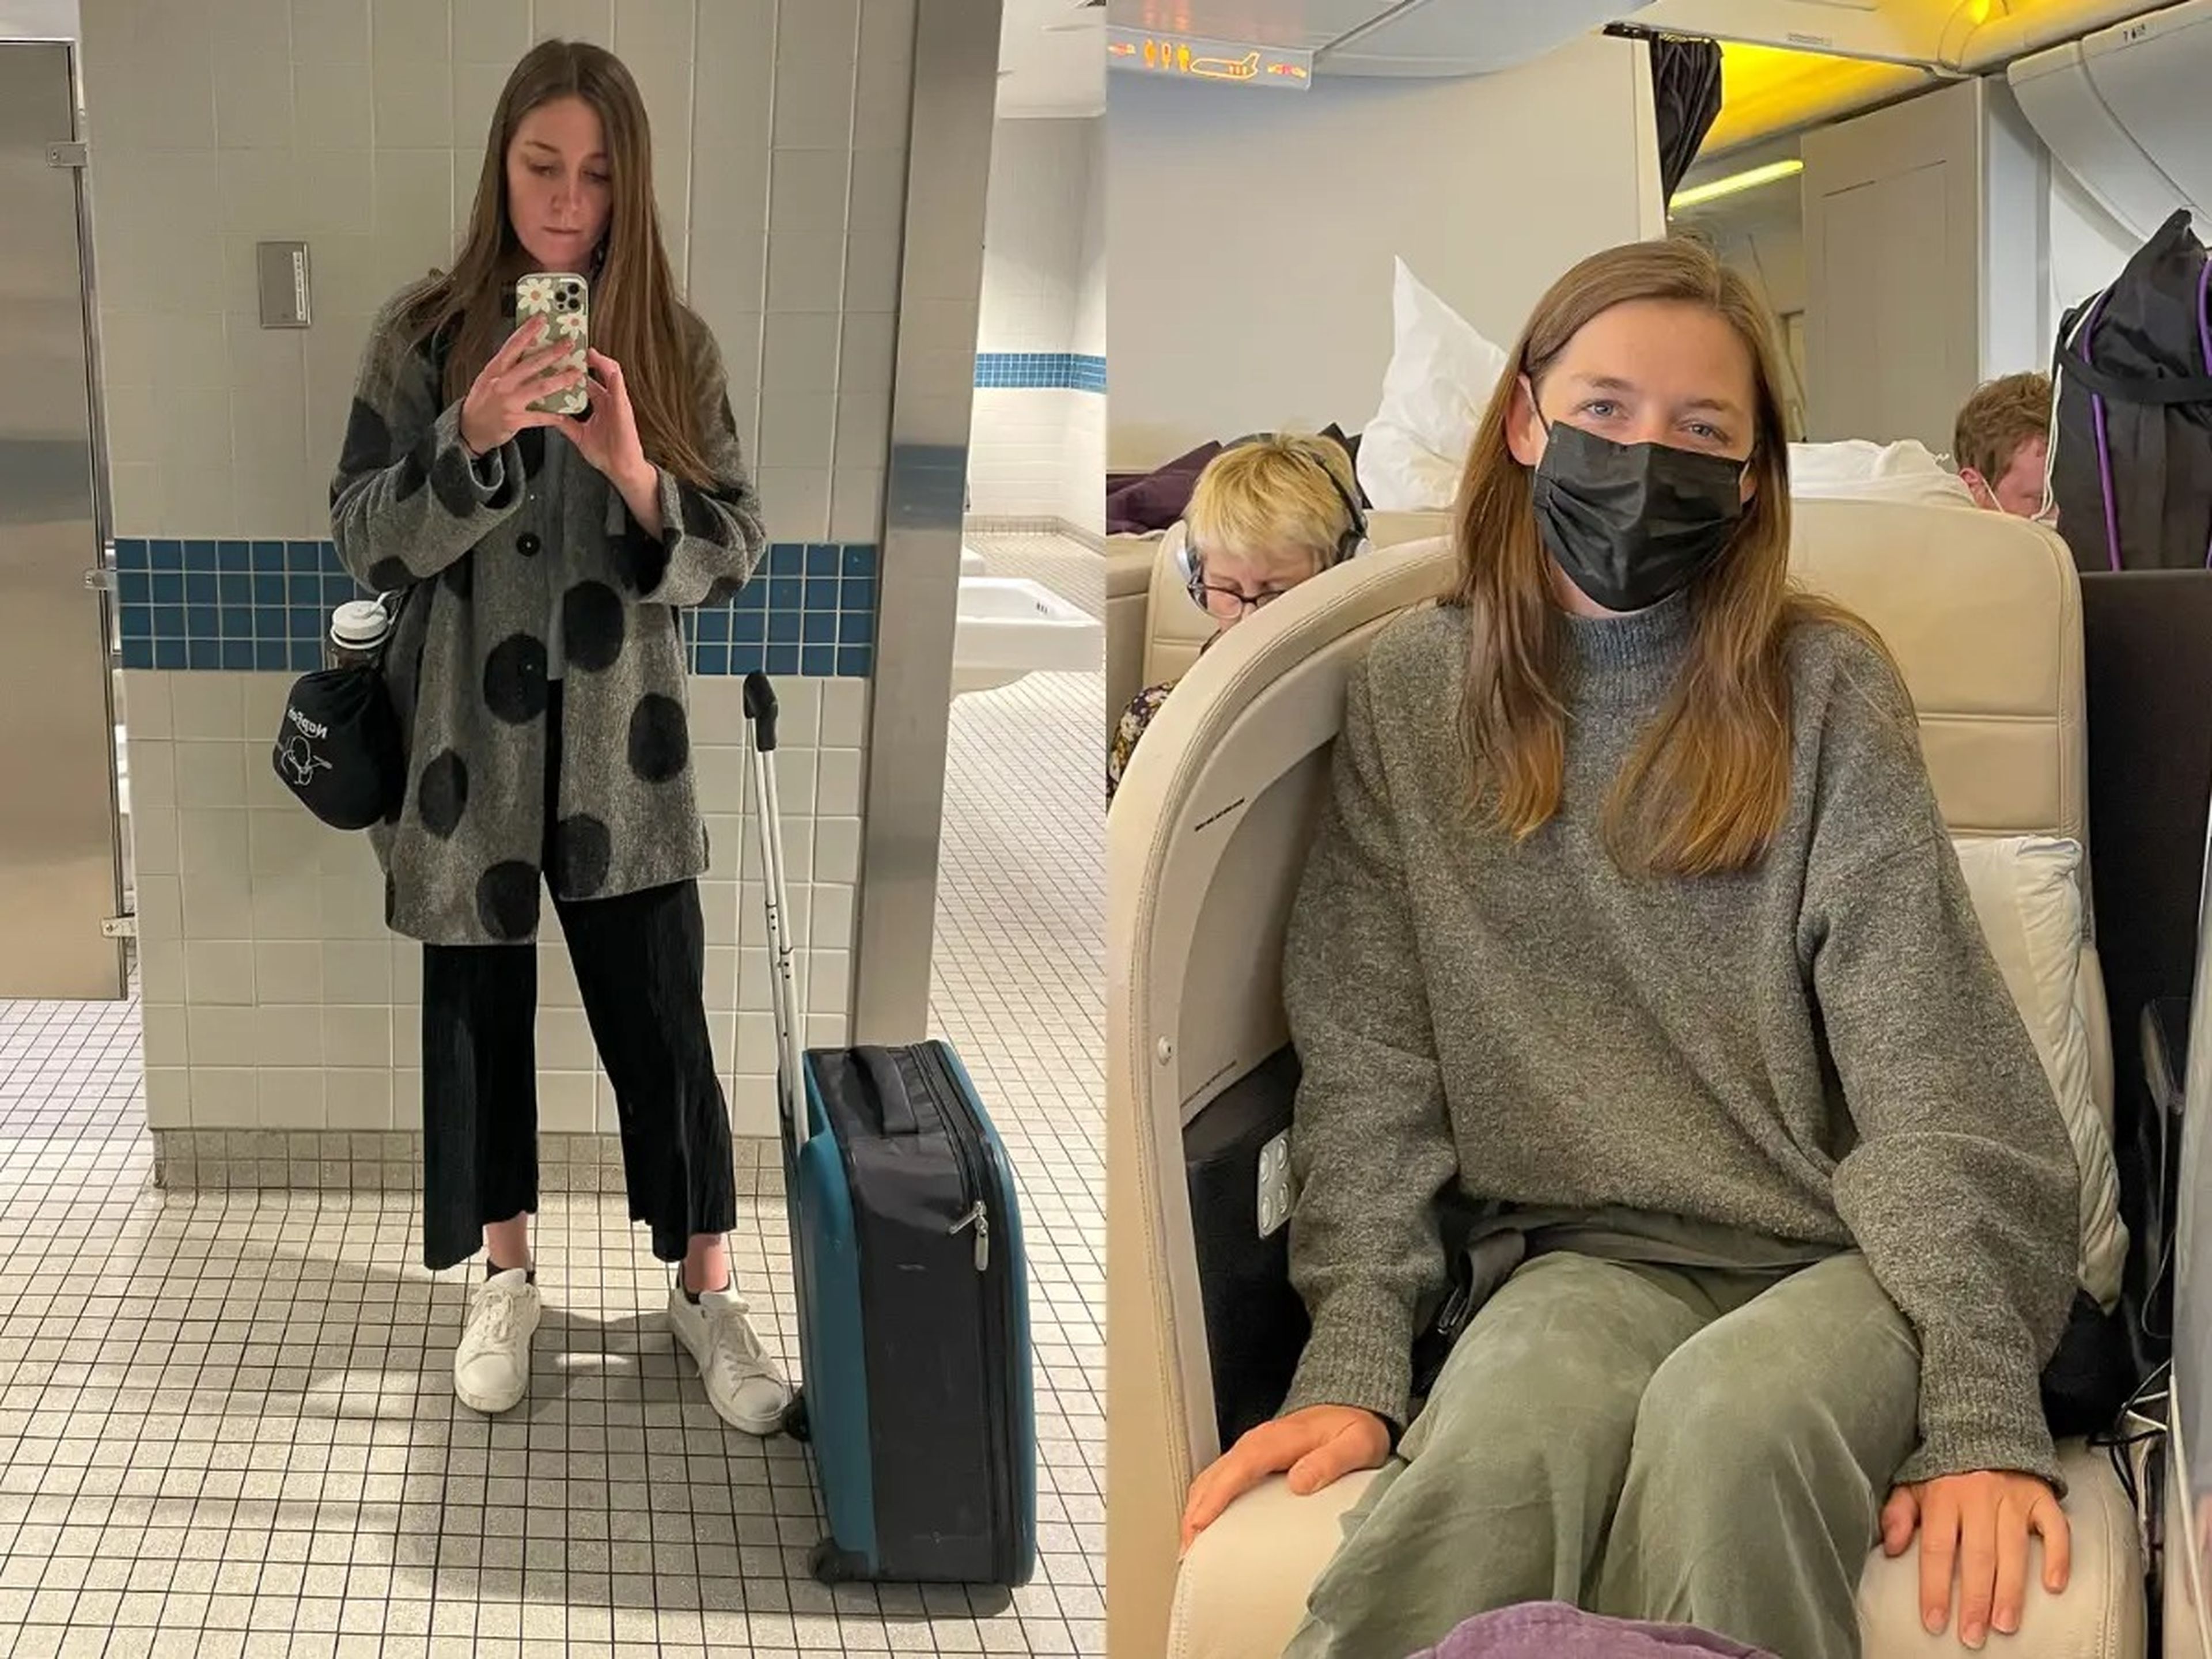 Insider's travel reporter swears there's only one type of pant to wear on a plane. It's not jeans or leggings. It's flowy pants.